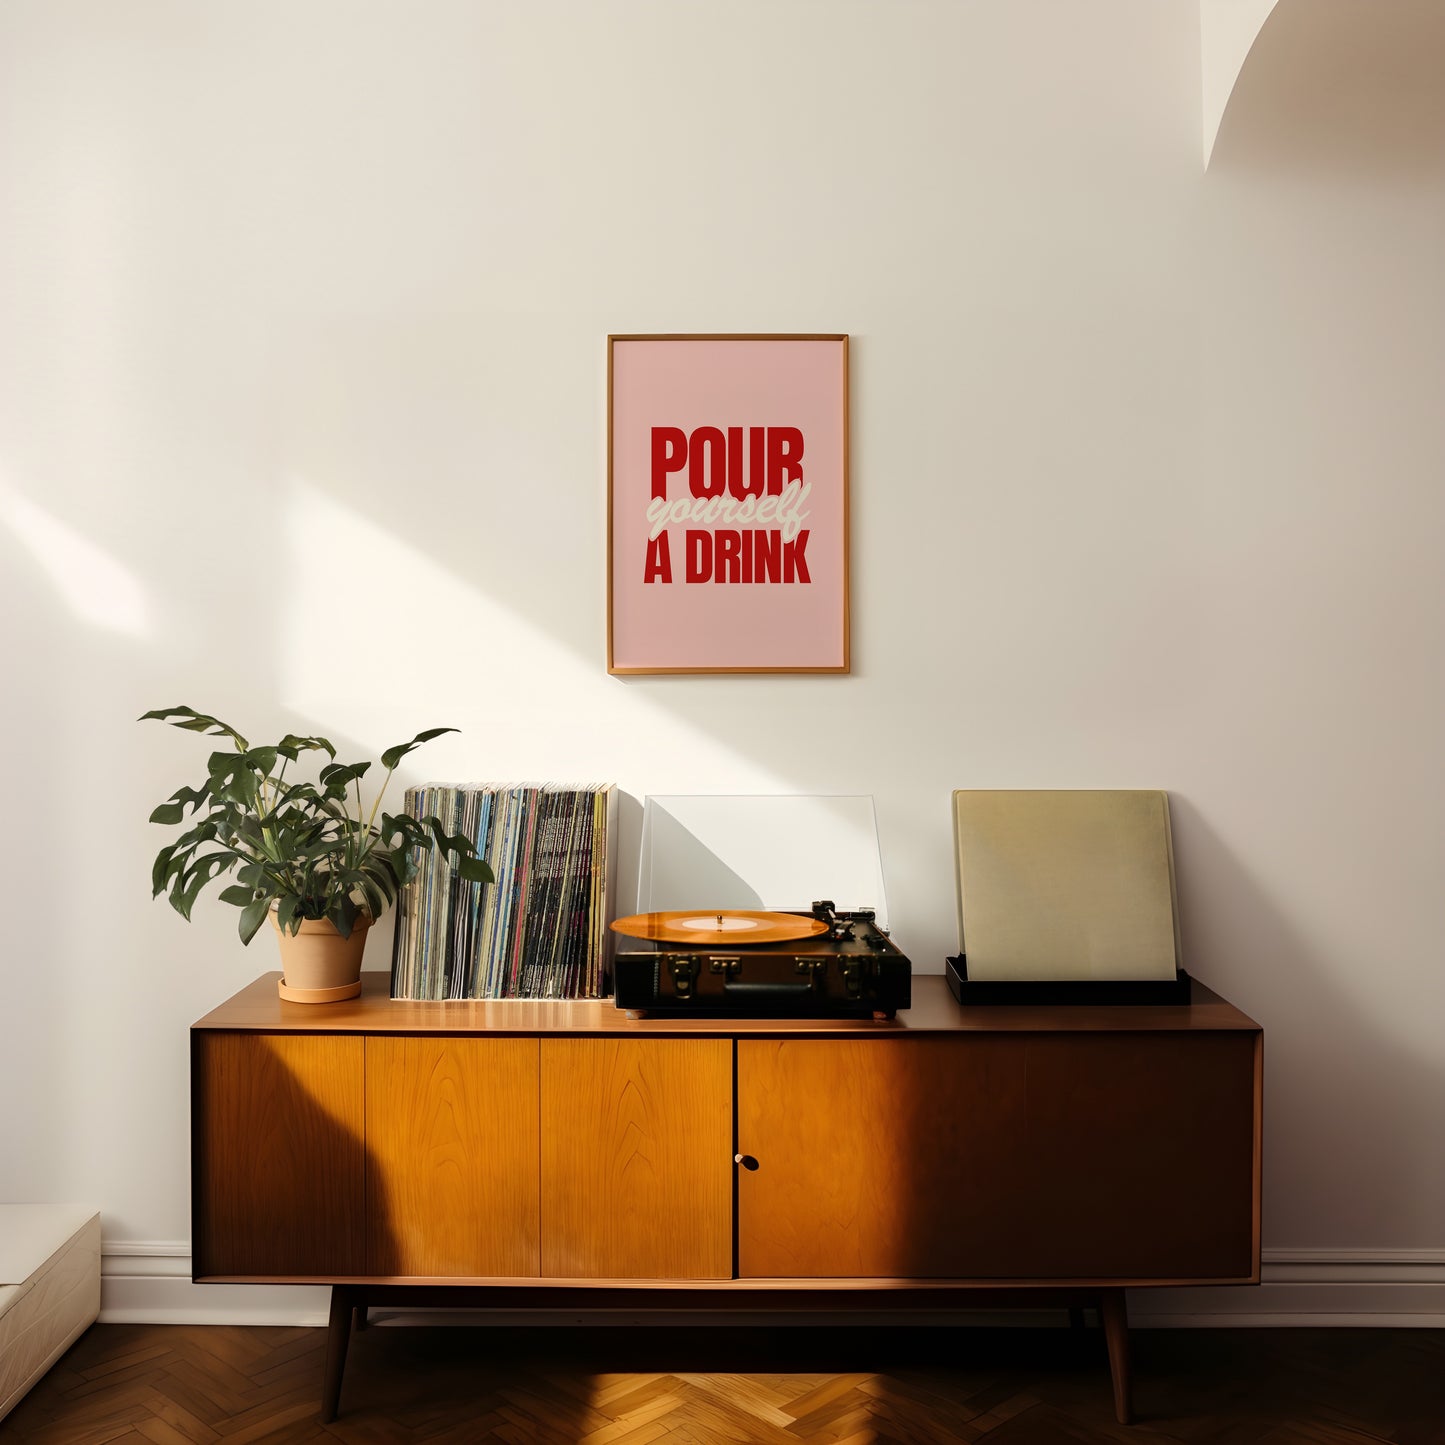 Pour Yourself a Drink Poster